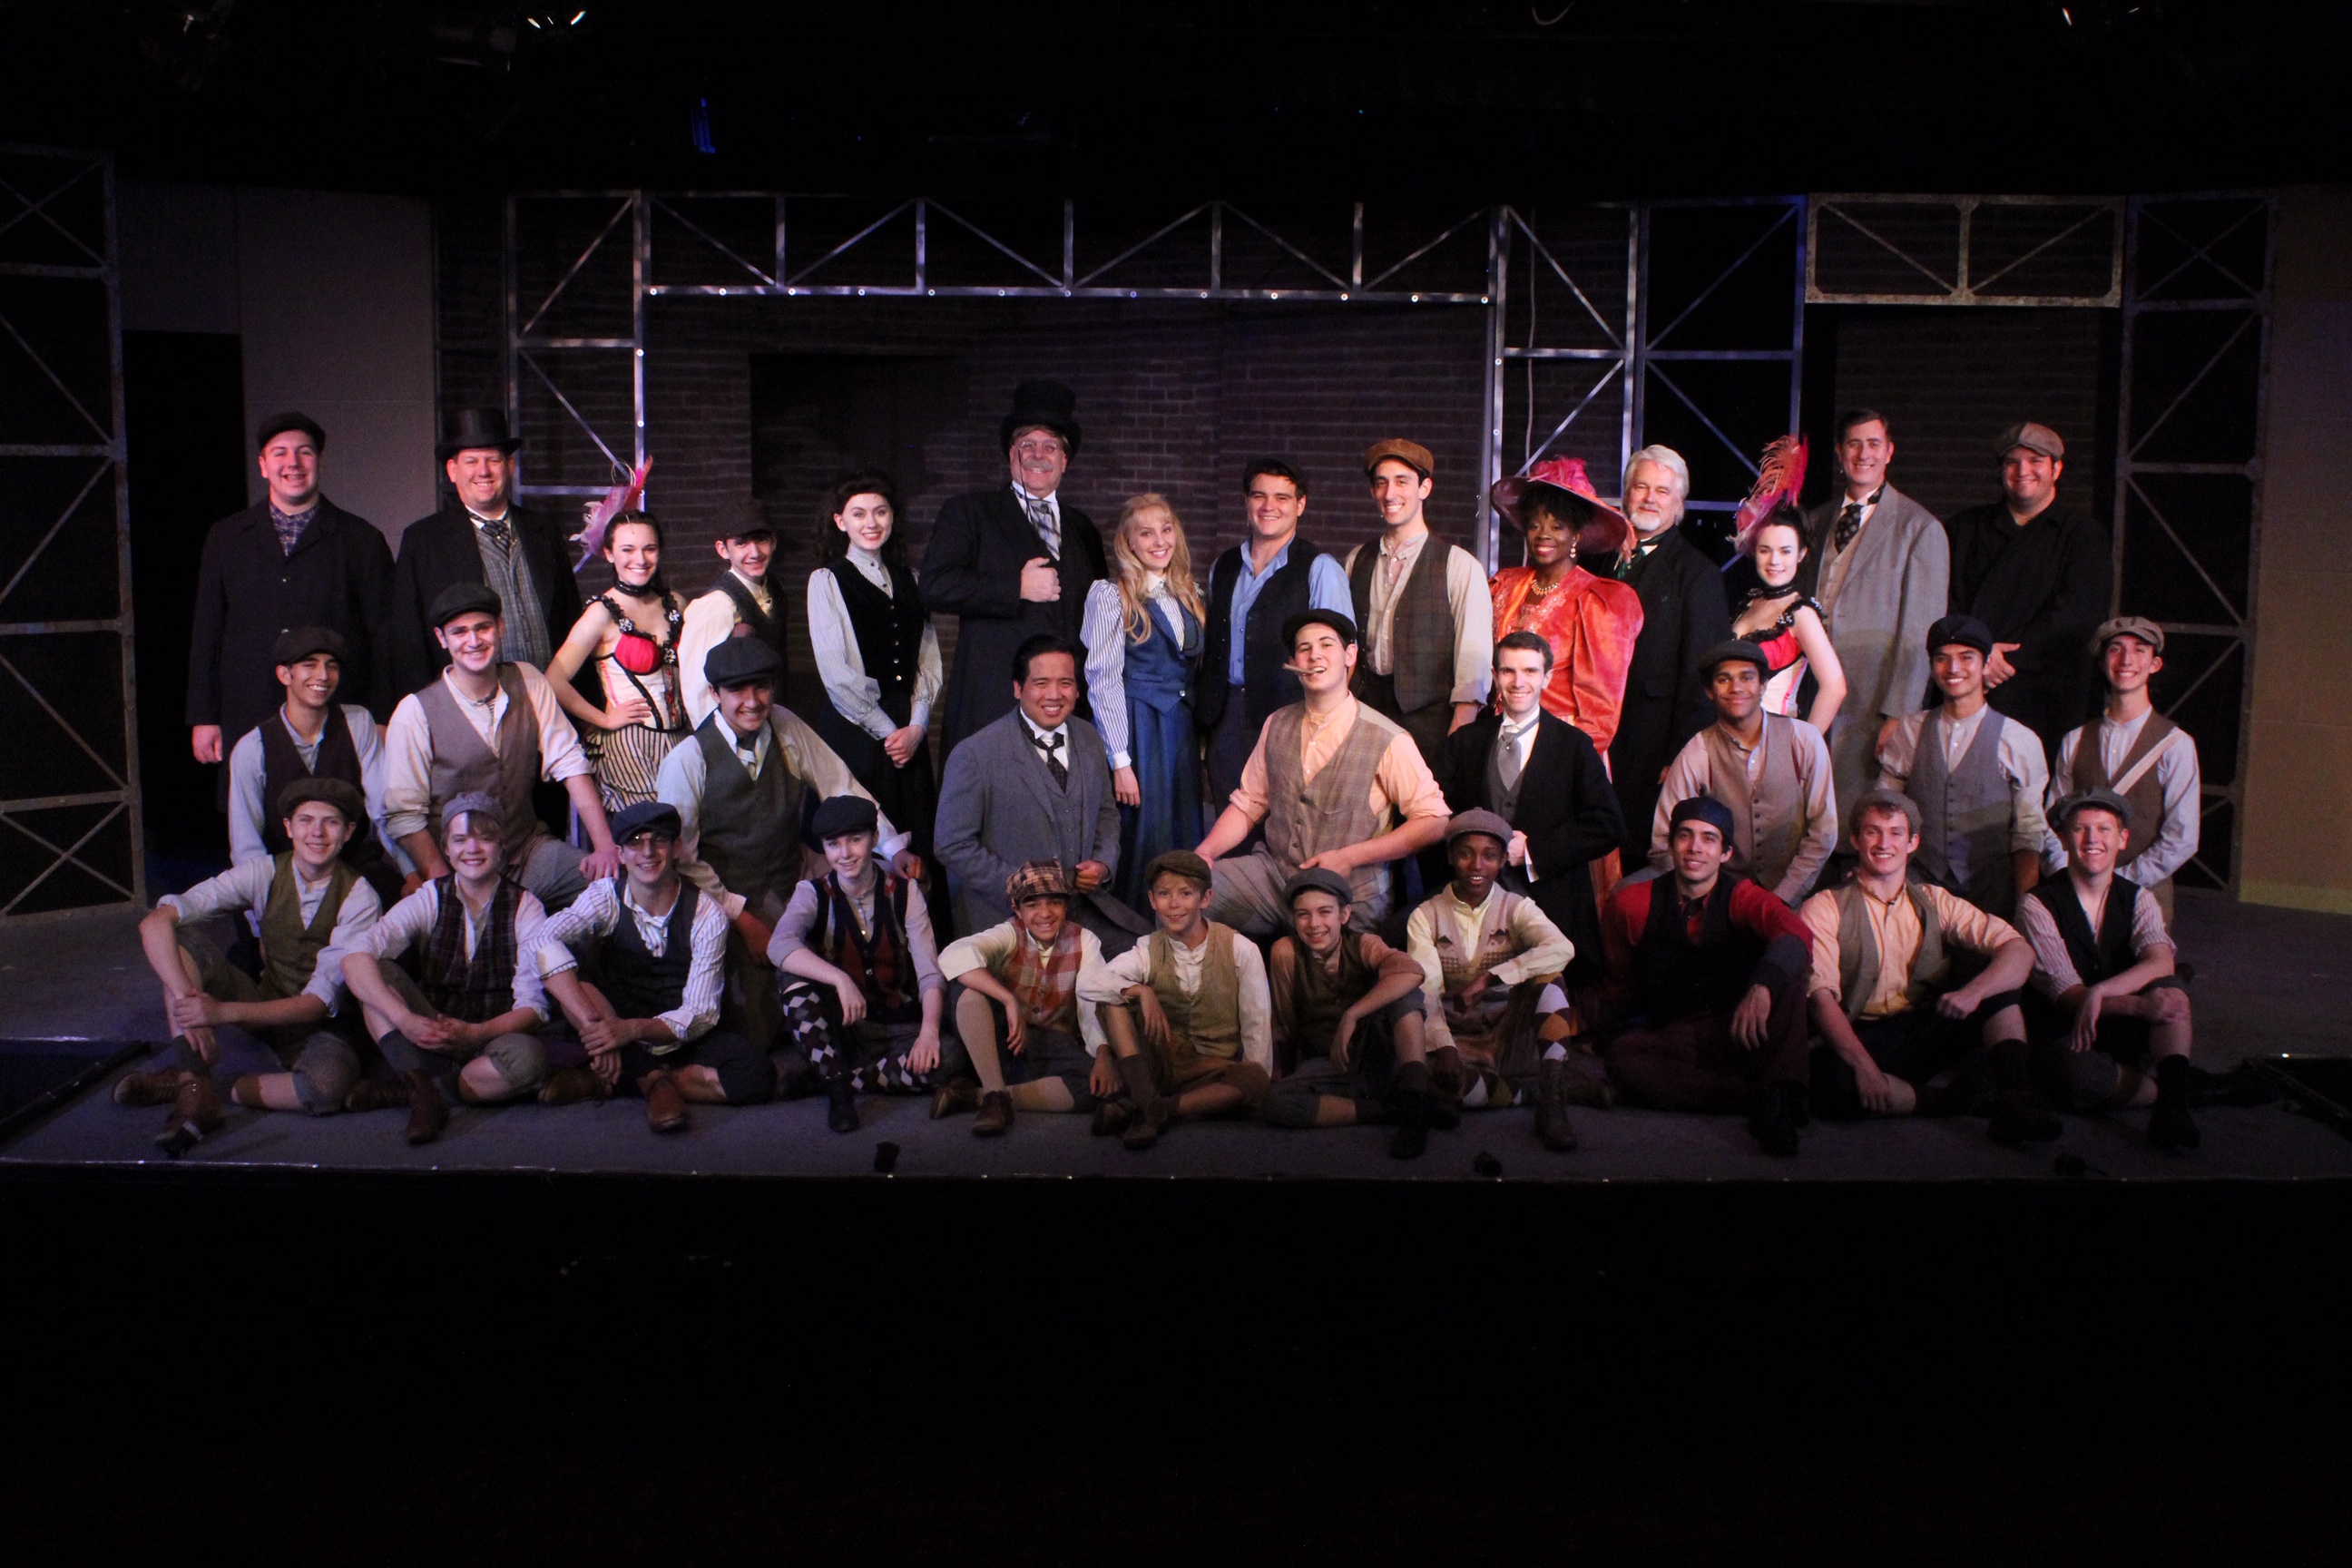 Disney S Newsies Musical On Stage At Roger Rocka S Kings River Life Magazine